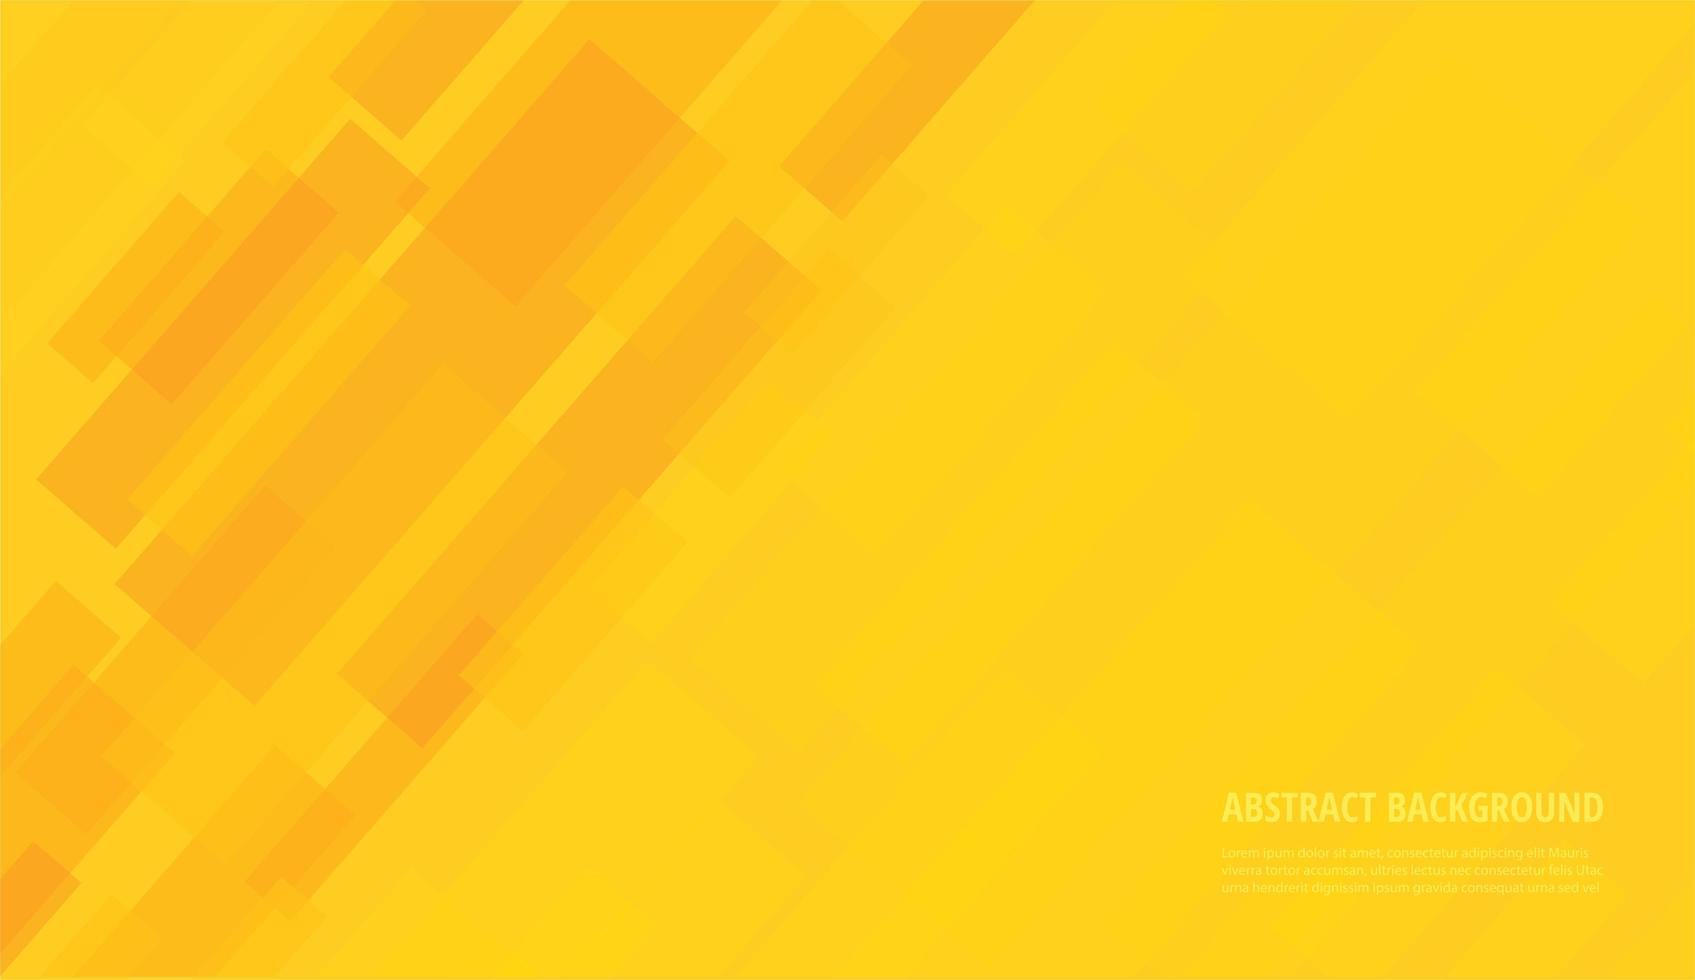 Abstract Yellow Background Vectors